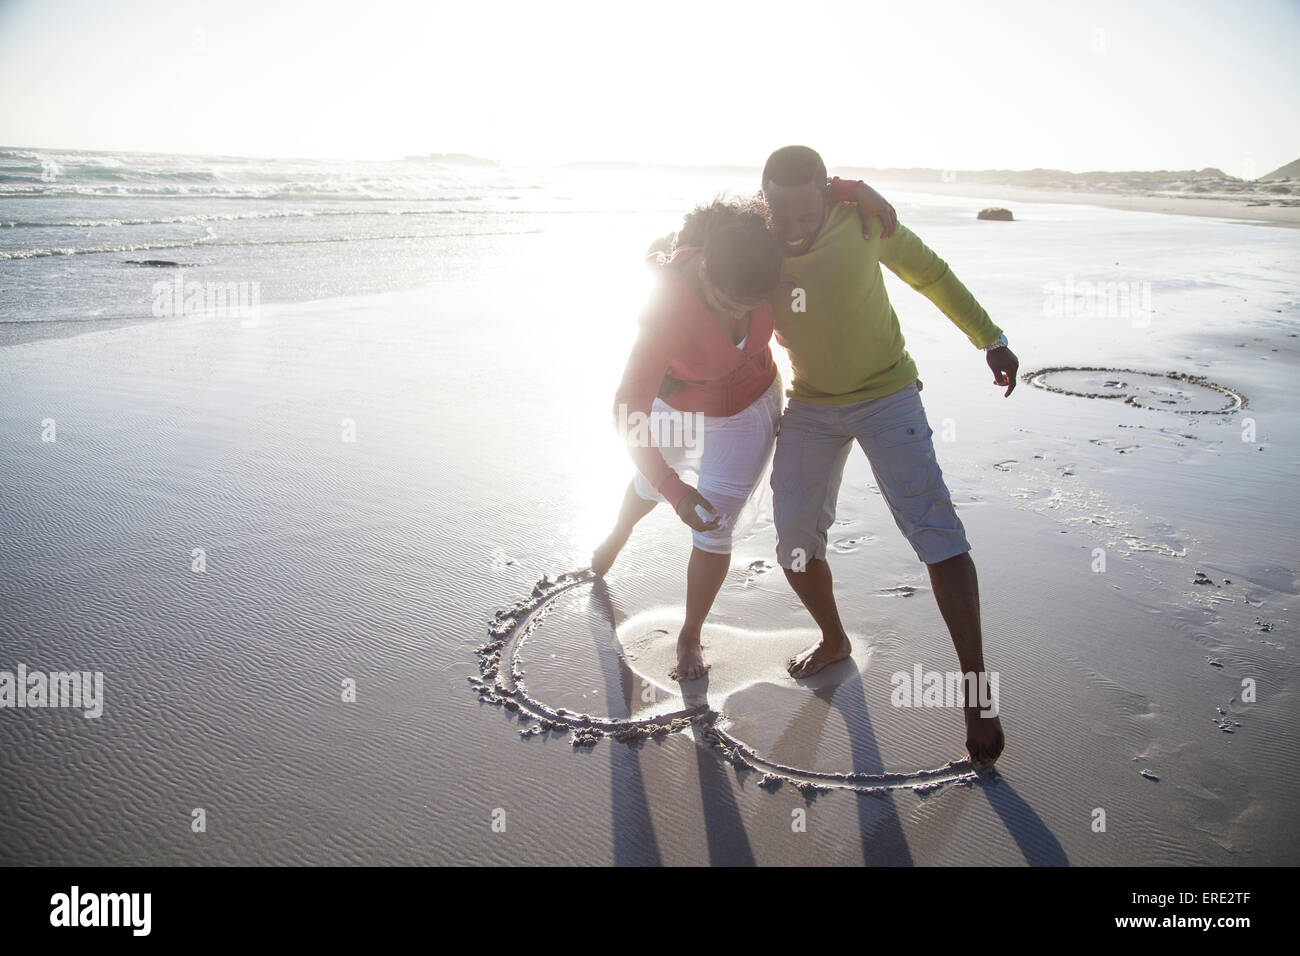 Couple drawing heart in sand on beach Stock Photo